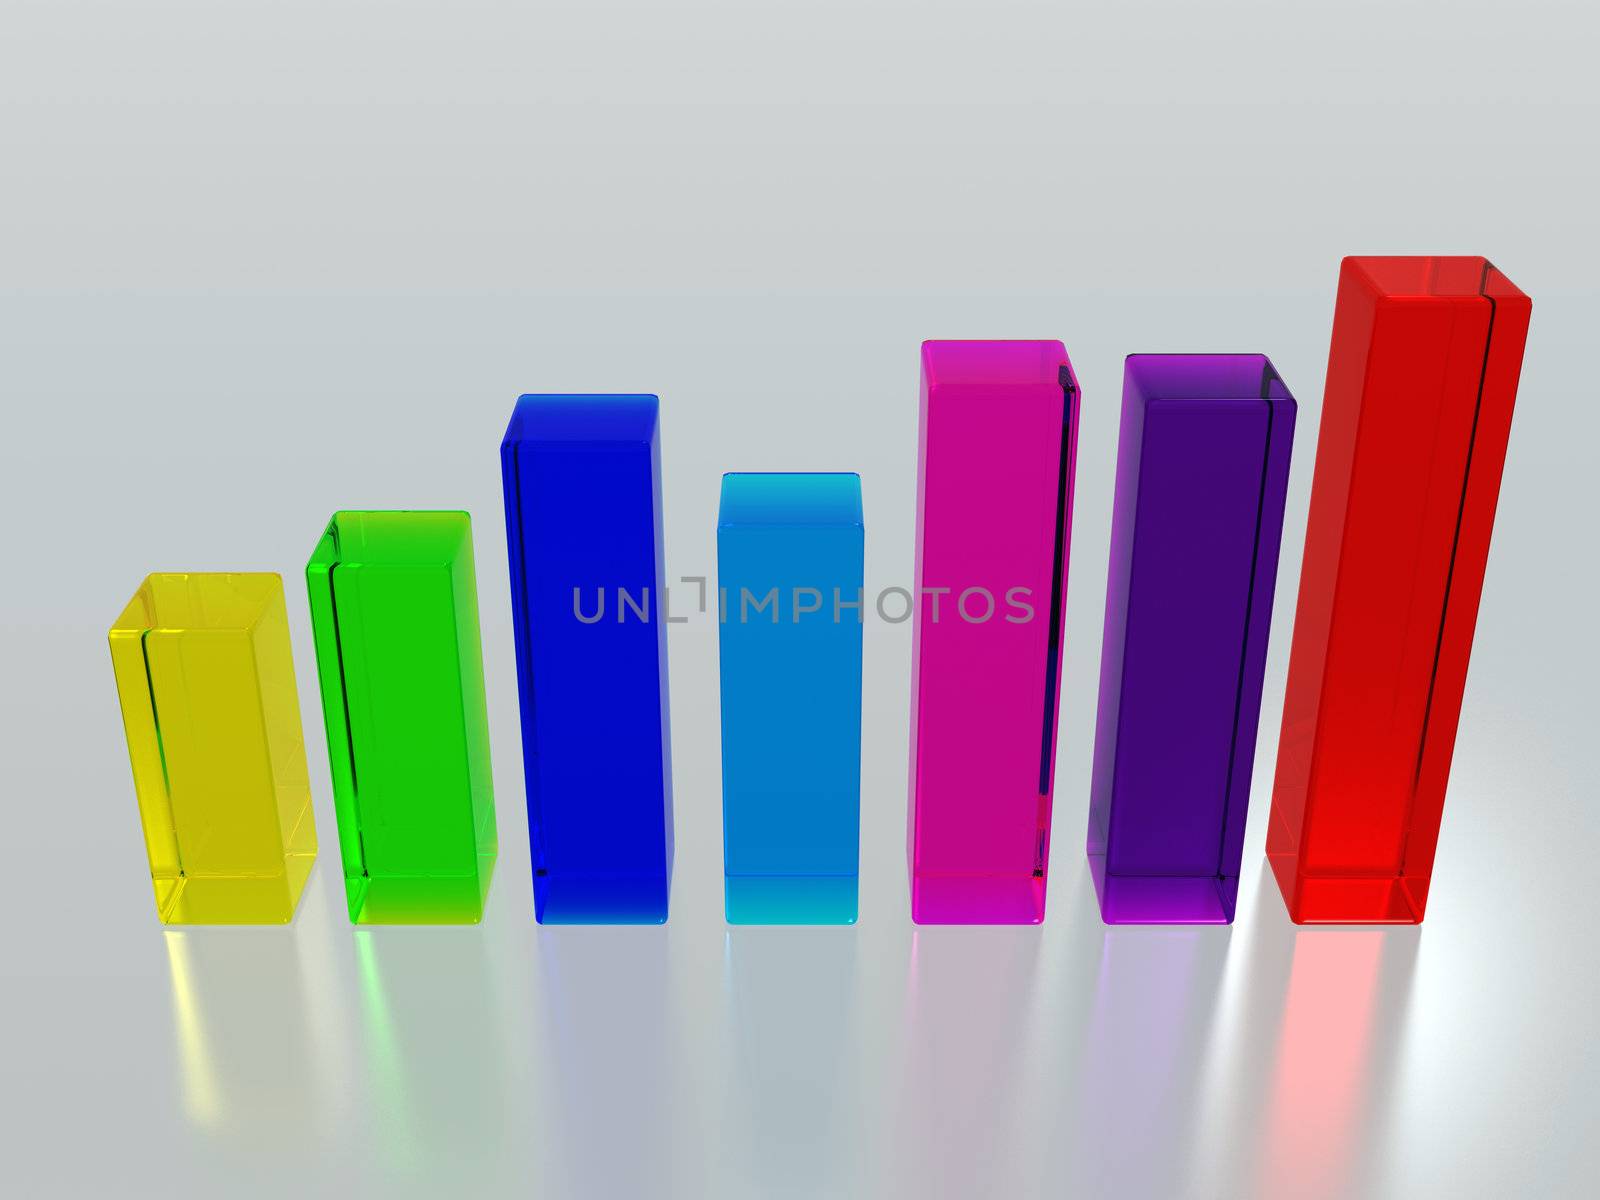 3d image of colored glossy bars